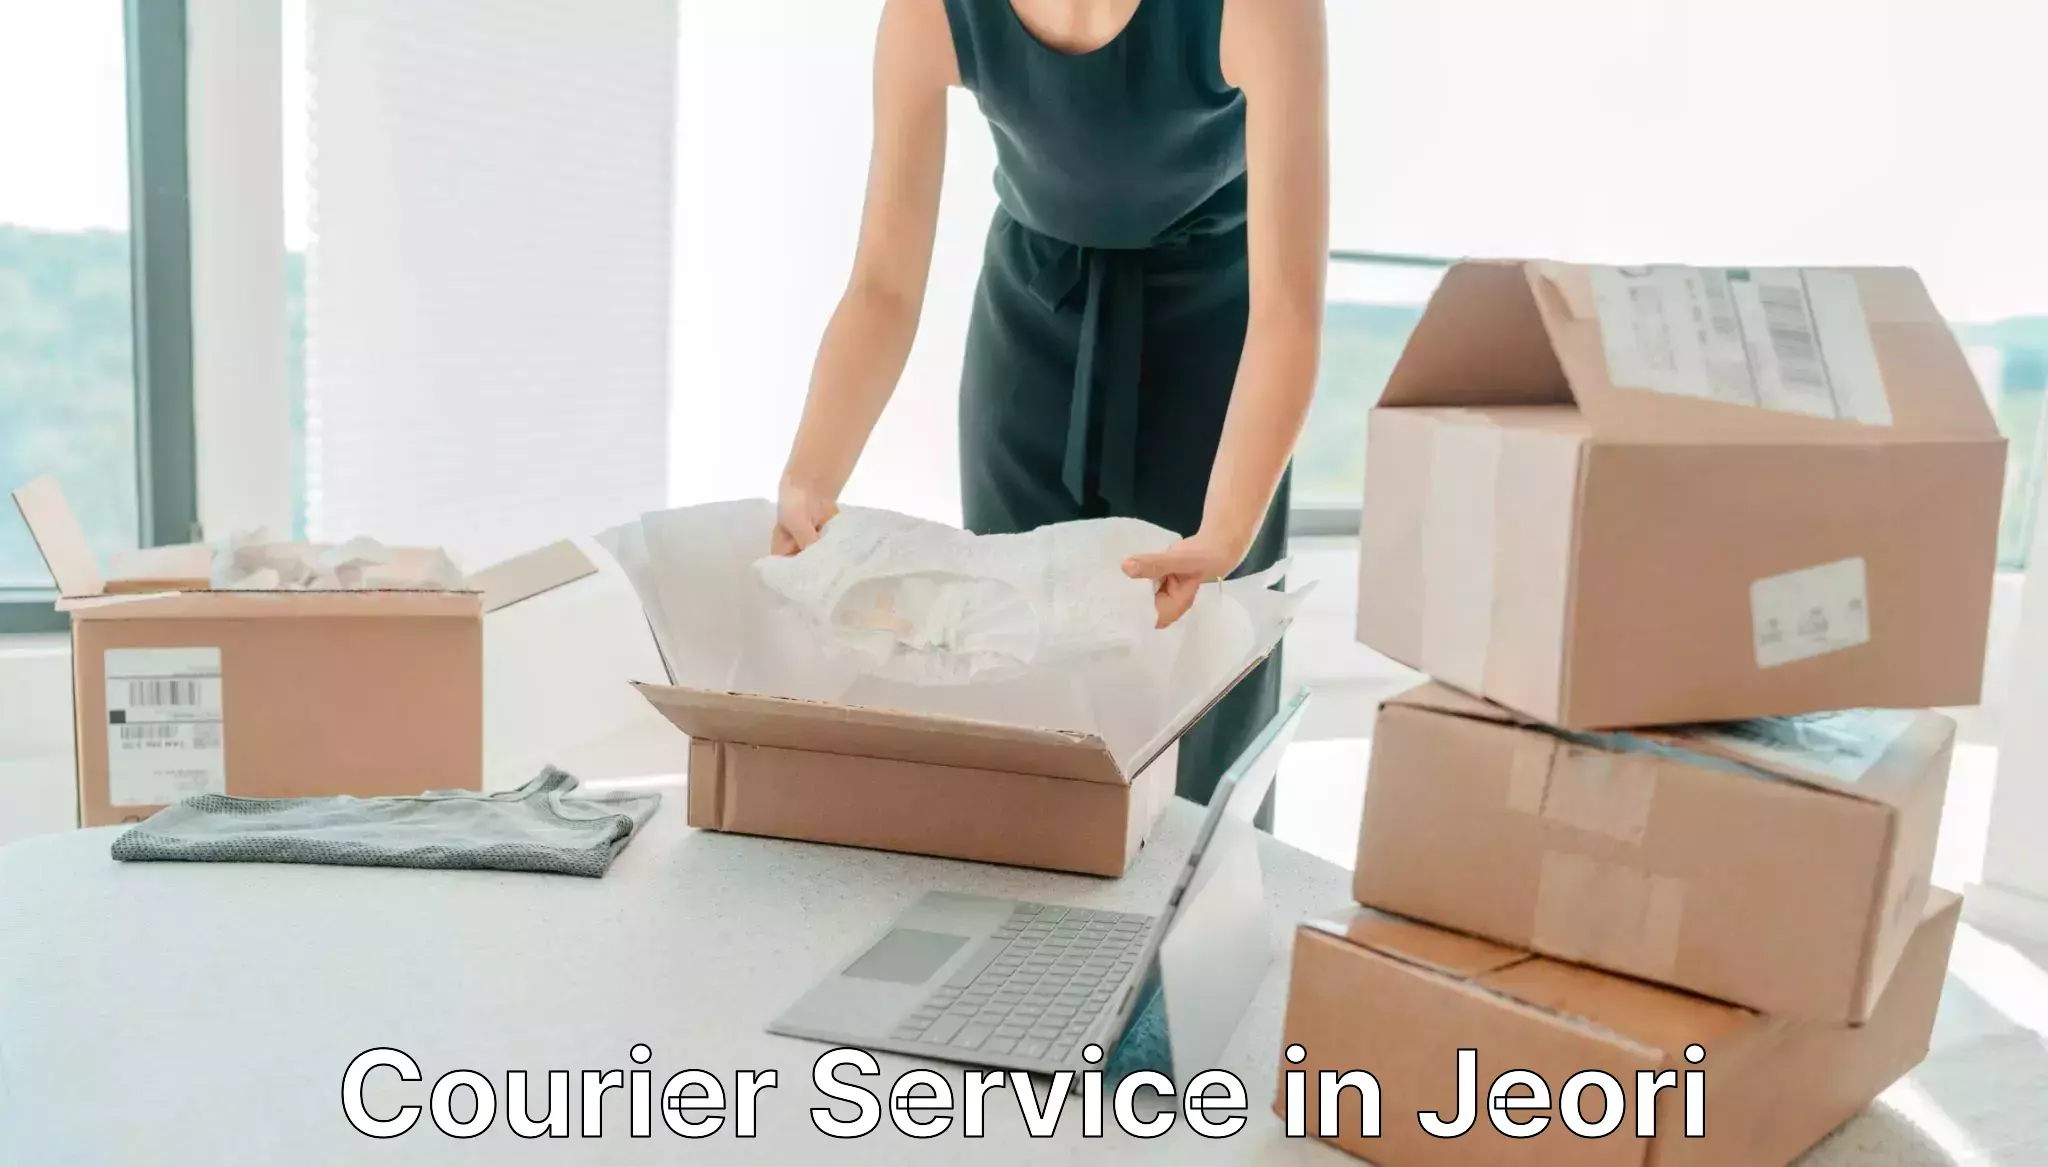 Trackable shipping service in Jeori